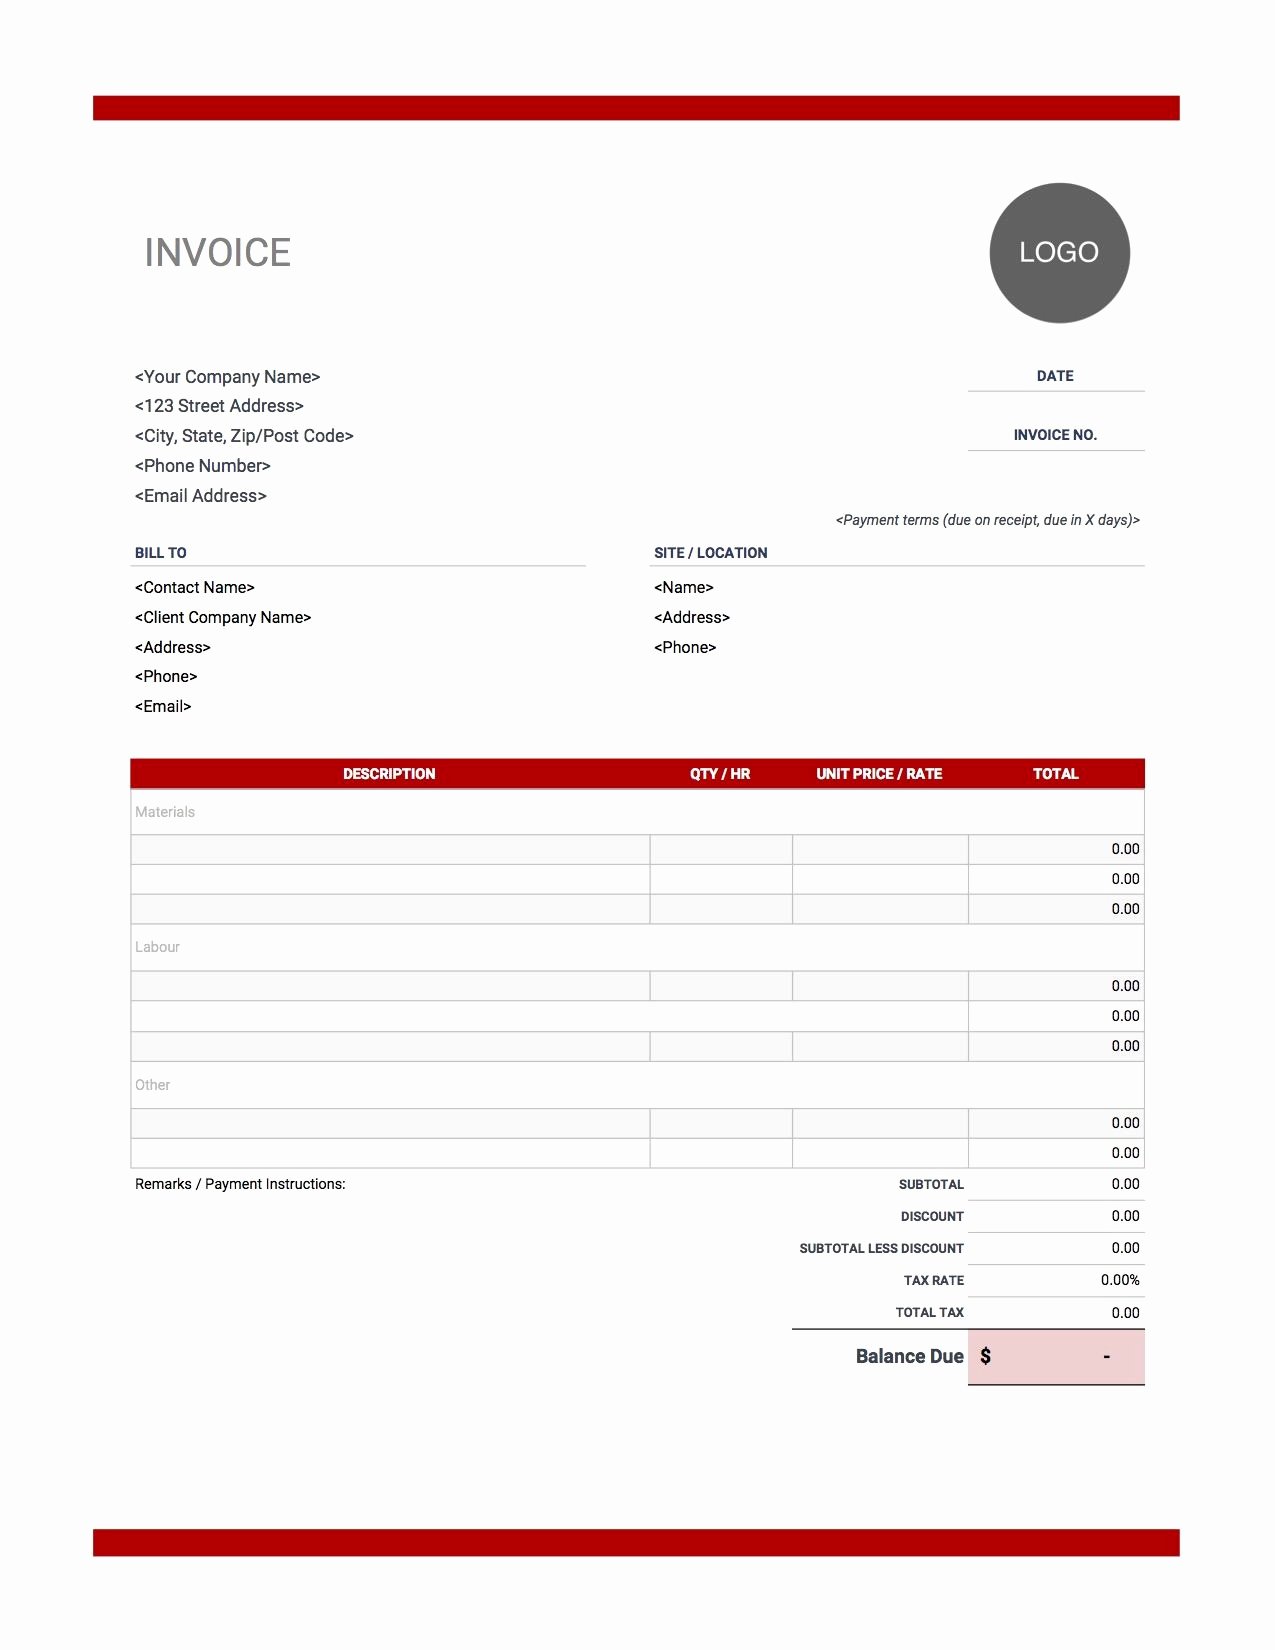 Independent Contractor Invoice Template Free Fresh Contractor Invoice Templates Free Download